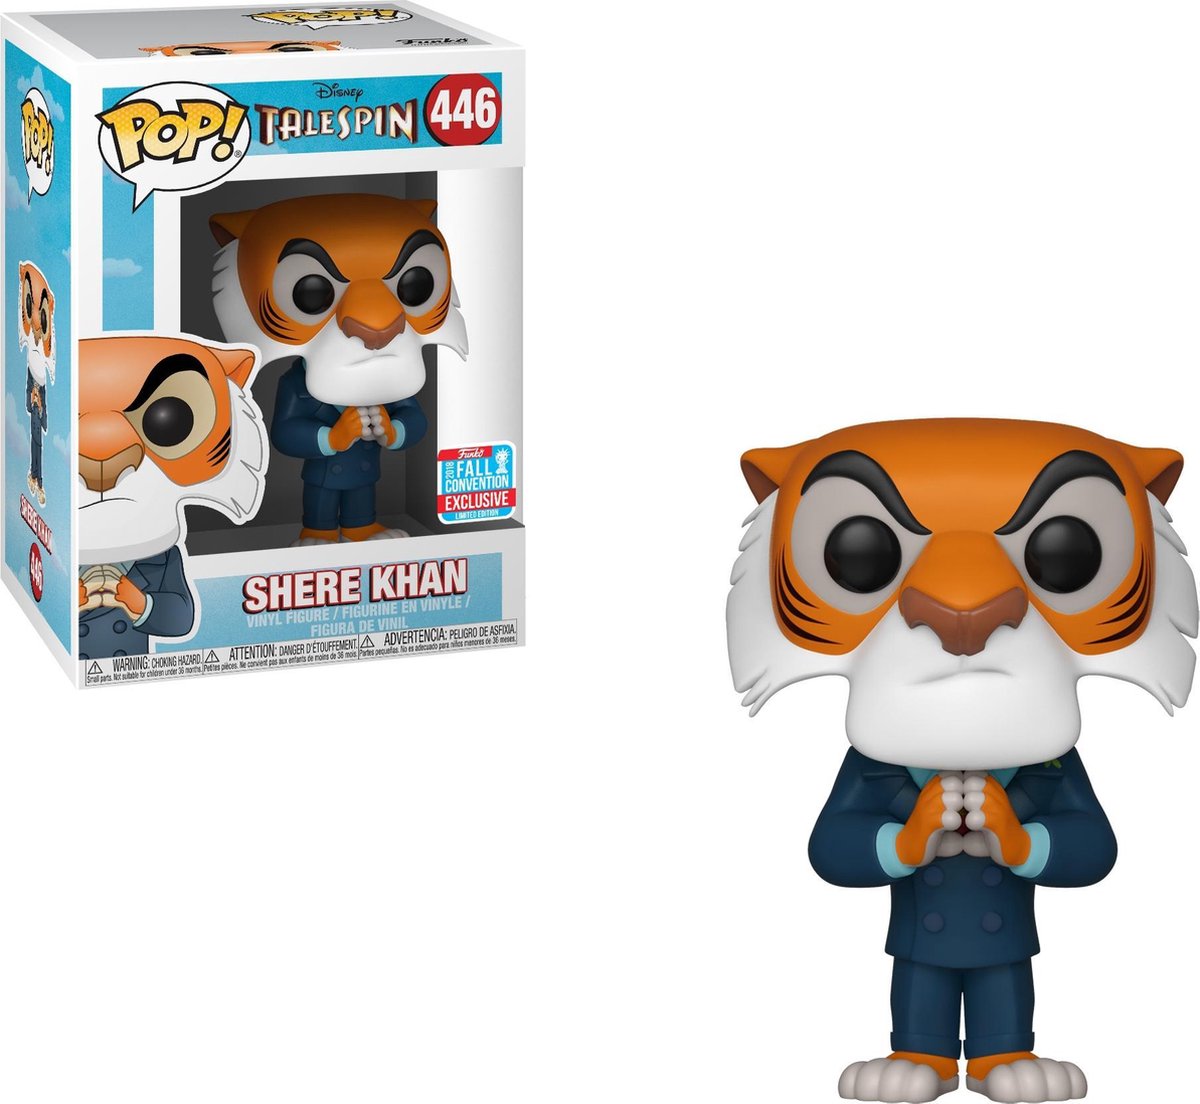 Funko Pop Shere Khan - Talespin - Disney - 2018 Fall Convention Exclusive - Funko